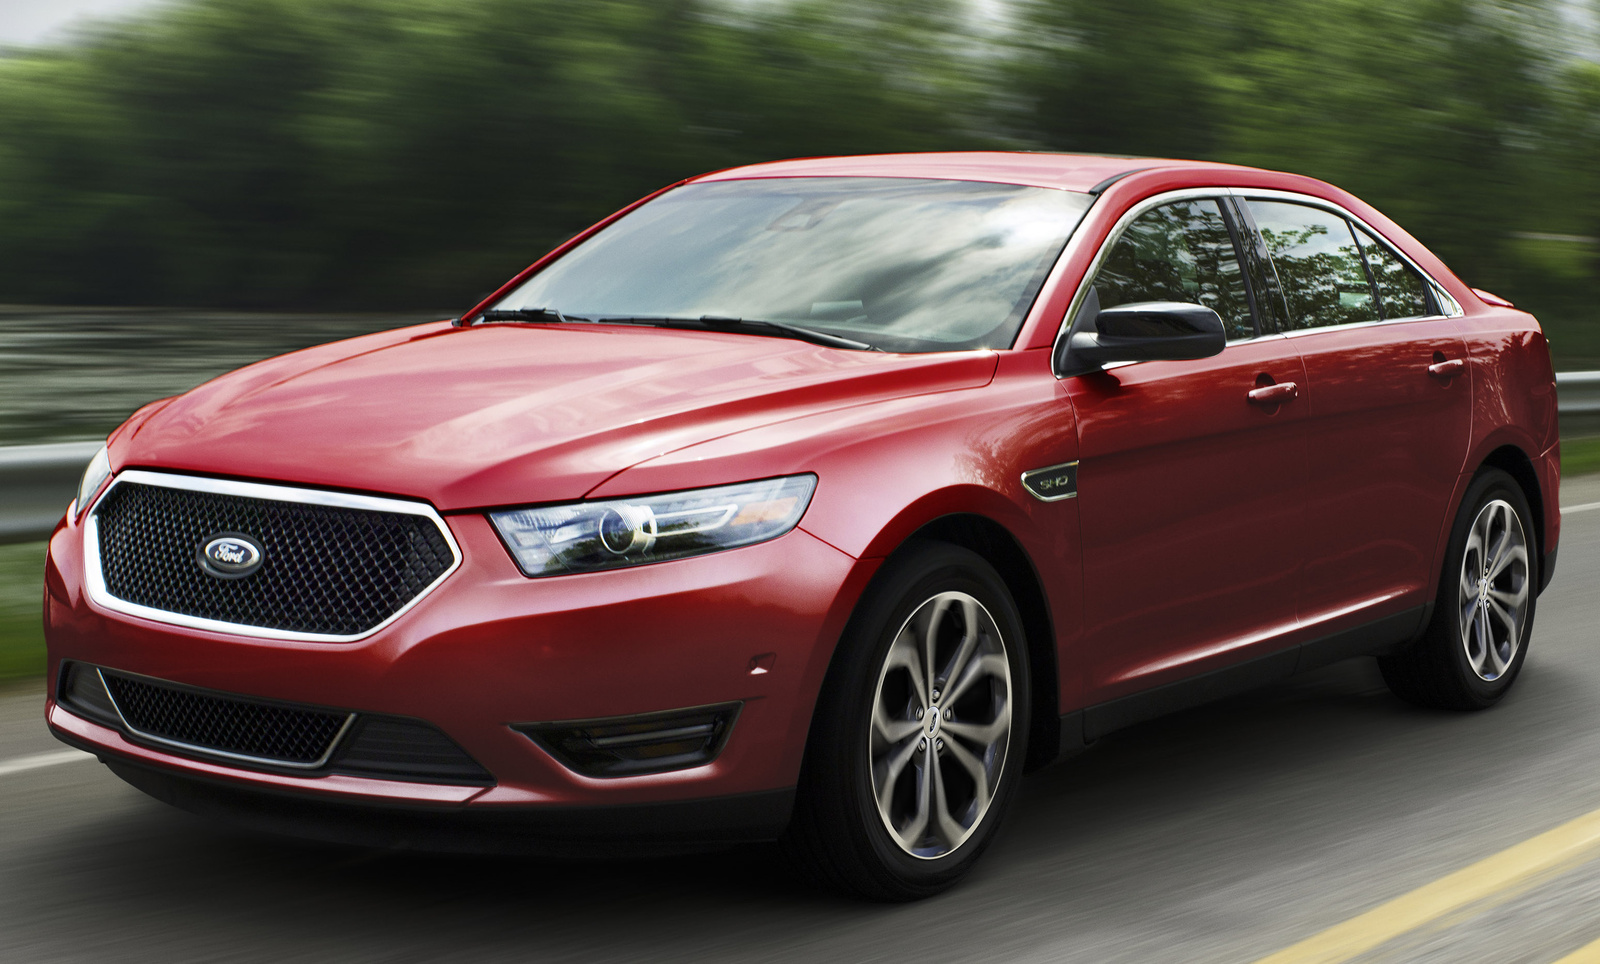 2017 Ford Taurus for Sale in Albany, NY  CarGurus